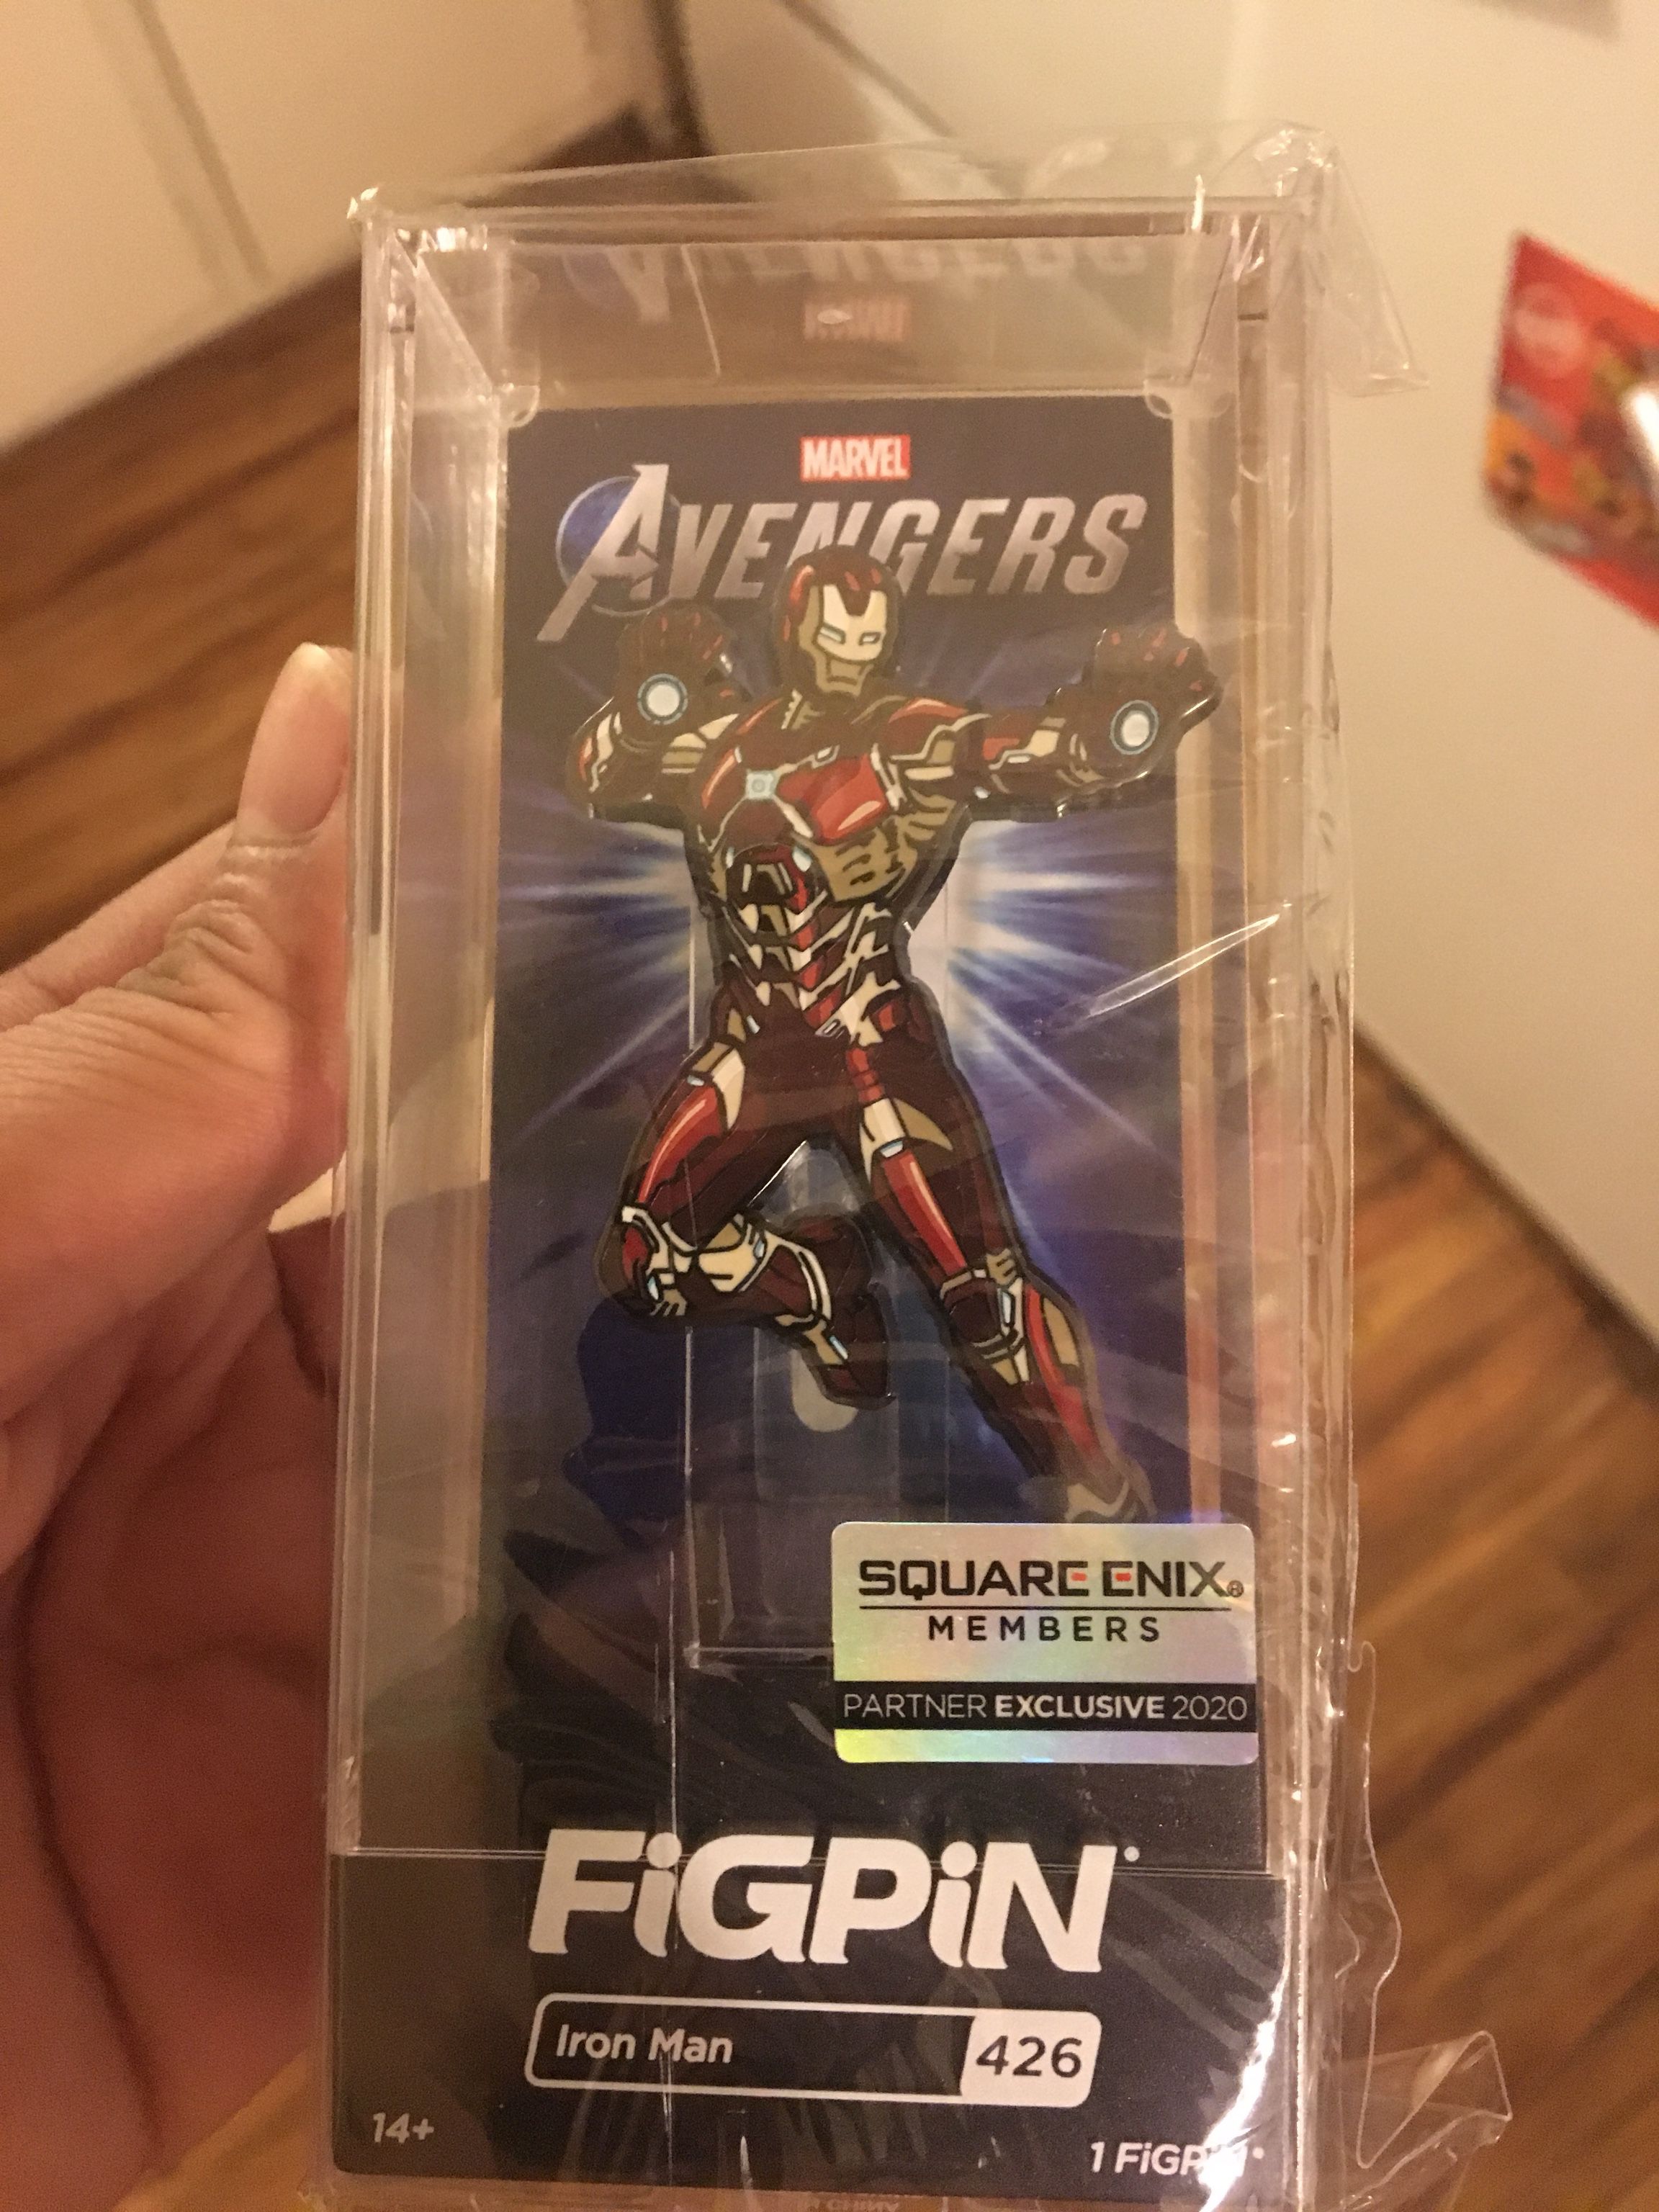 Iron Man Fig Pin Limited Square Exclusive New Sealed